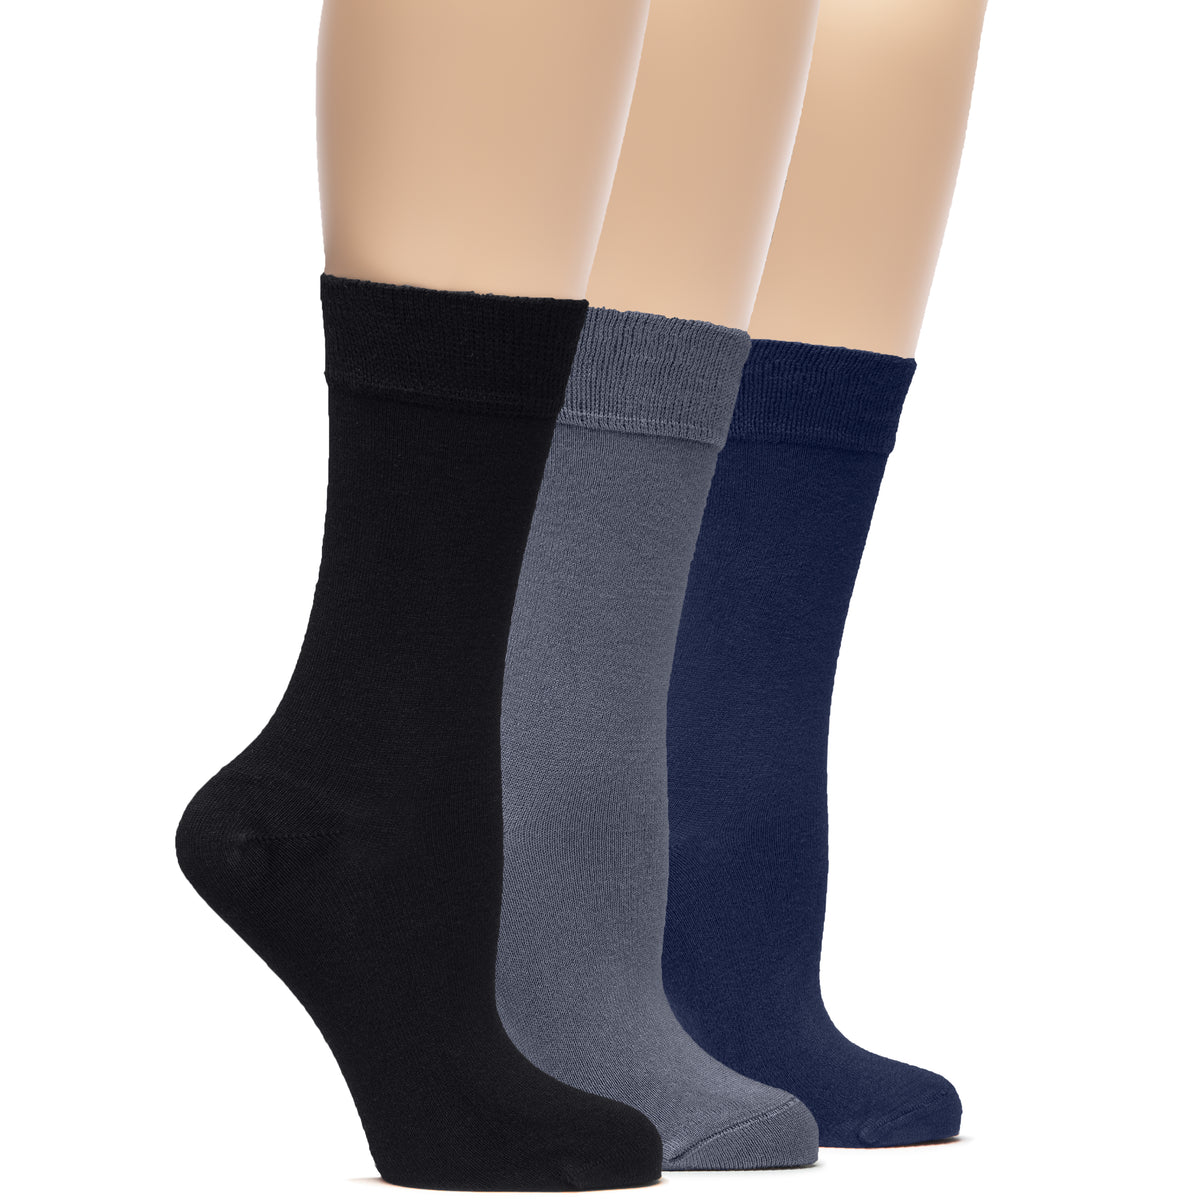 A trio of women's bamboo crew socks in black, grey, and blue. Perfect for everyday wear and ultimate comfort.